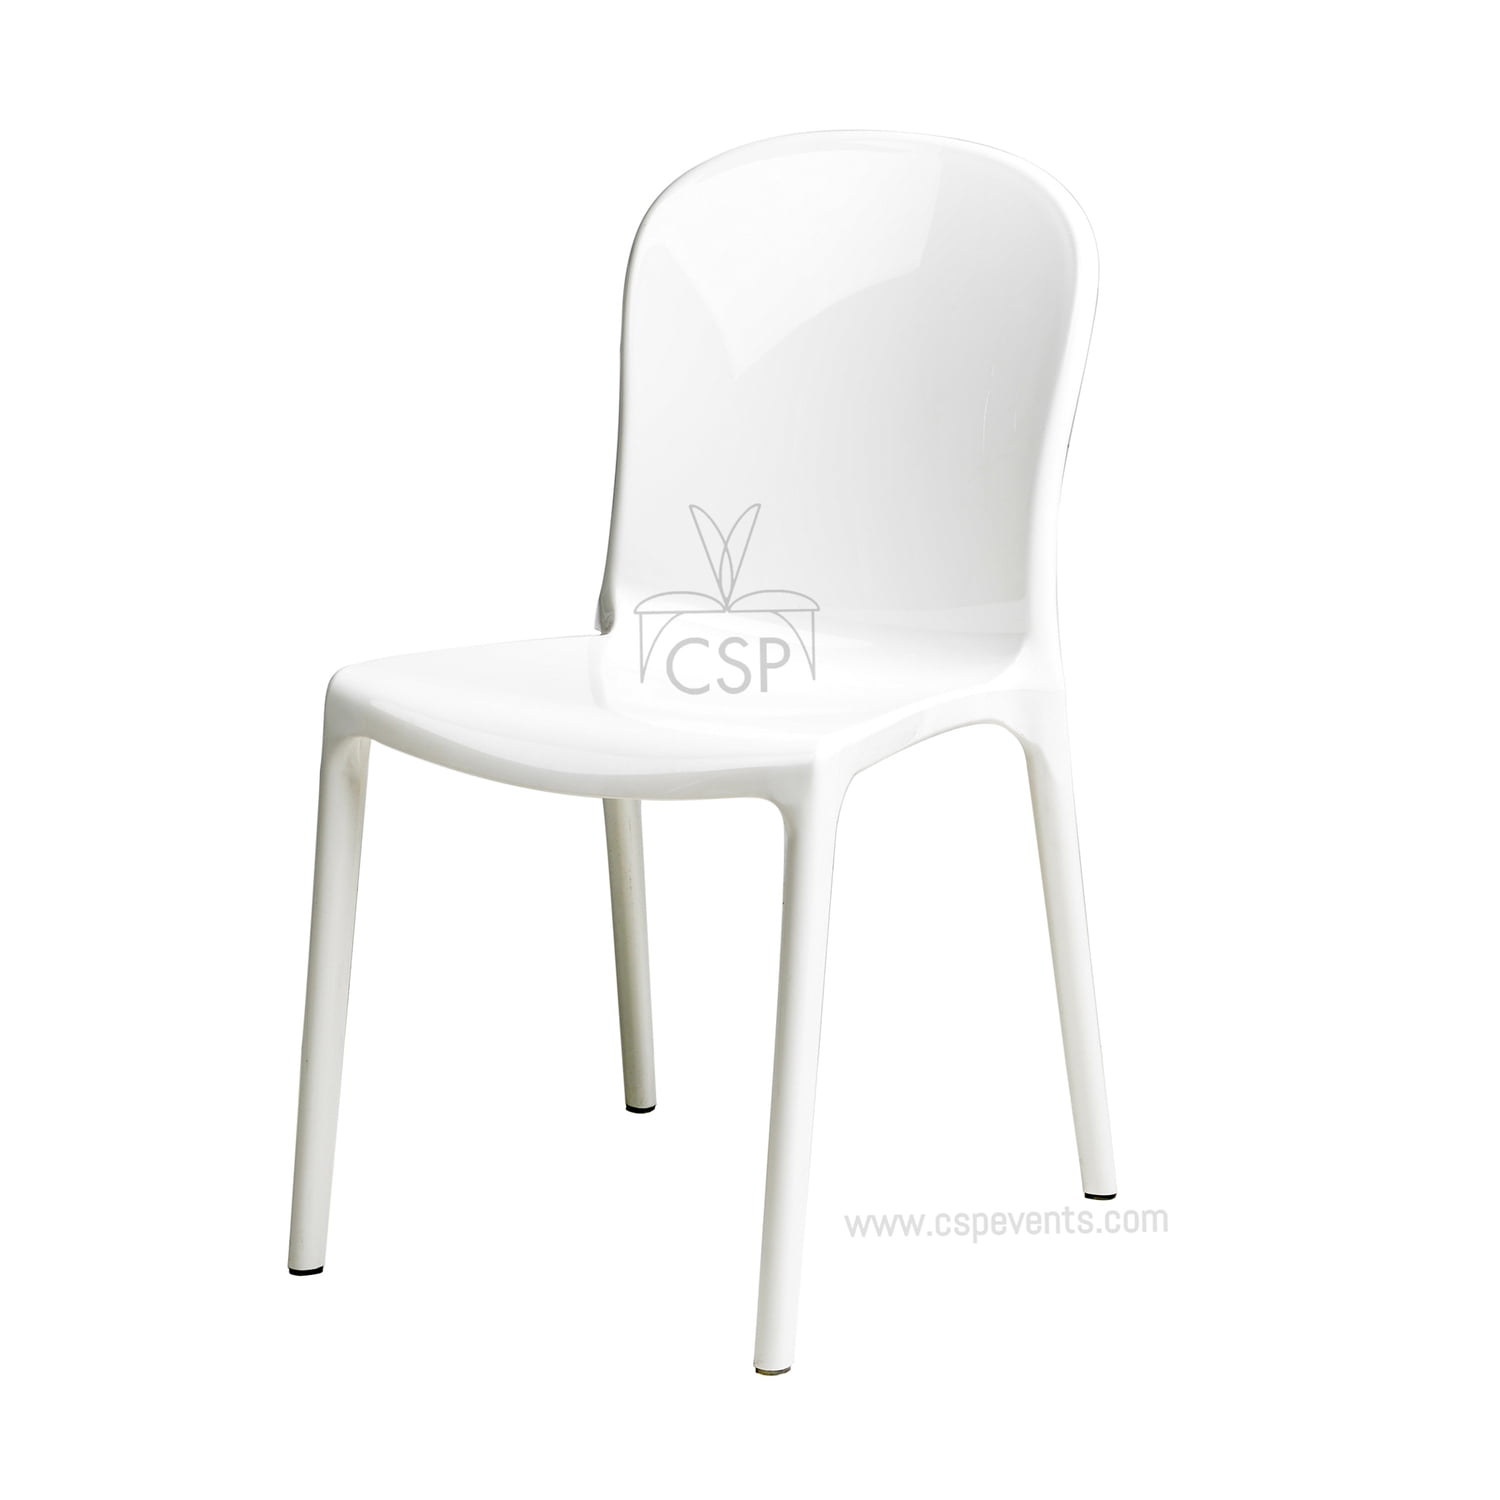 Rpc-genoa-wh-web4 Genoa Polycarbonate Stackable White Chair, Set Of 4 - 33 X 16.5 X 21 In.